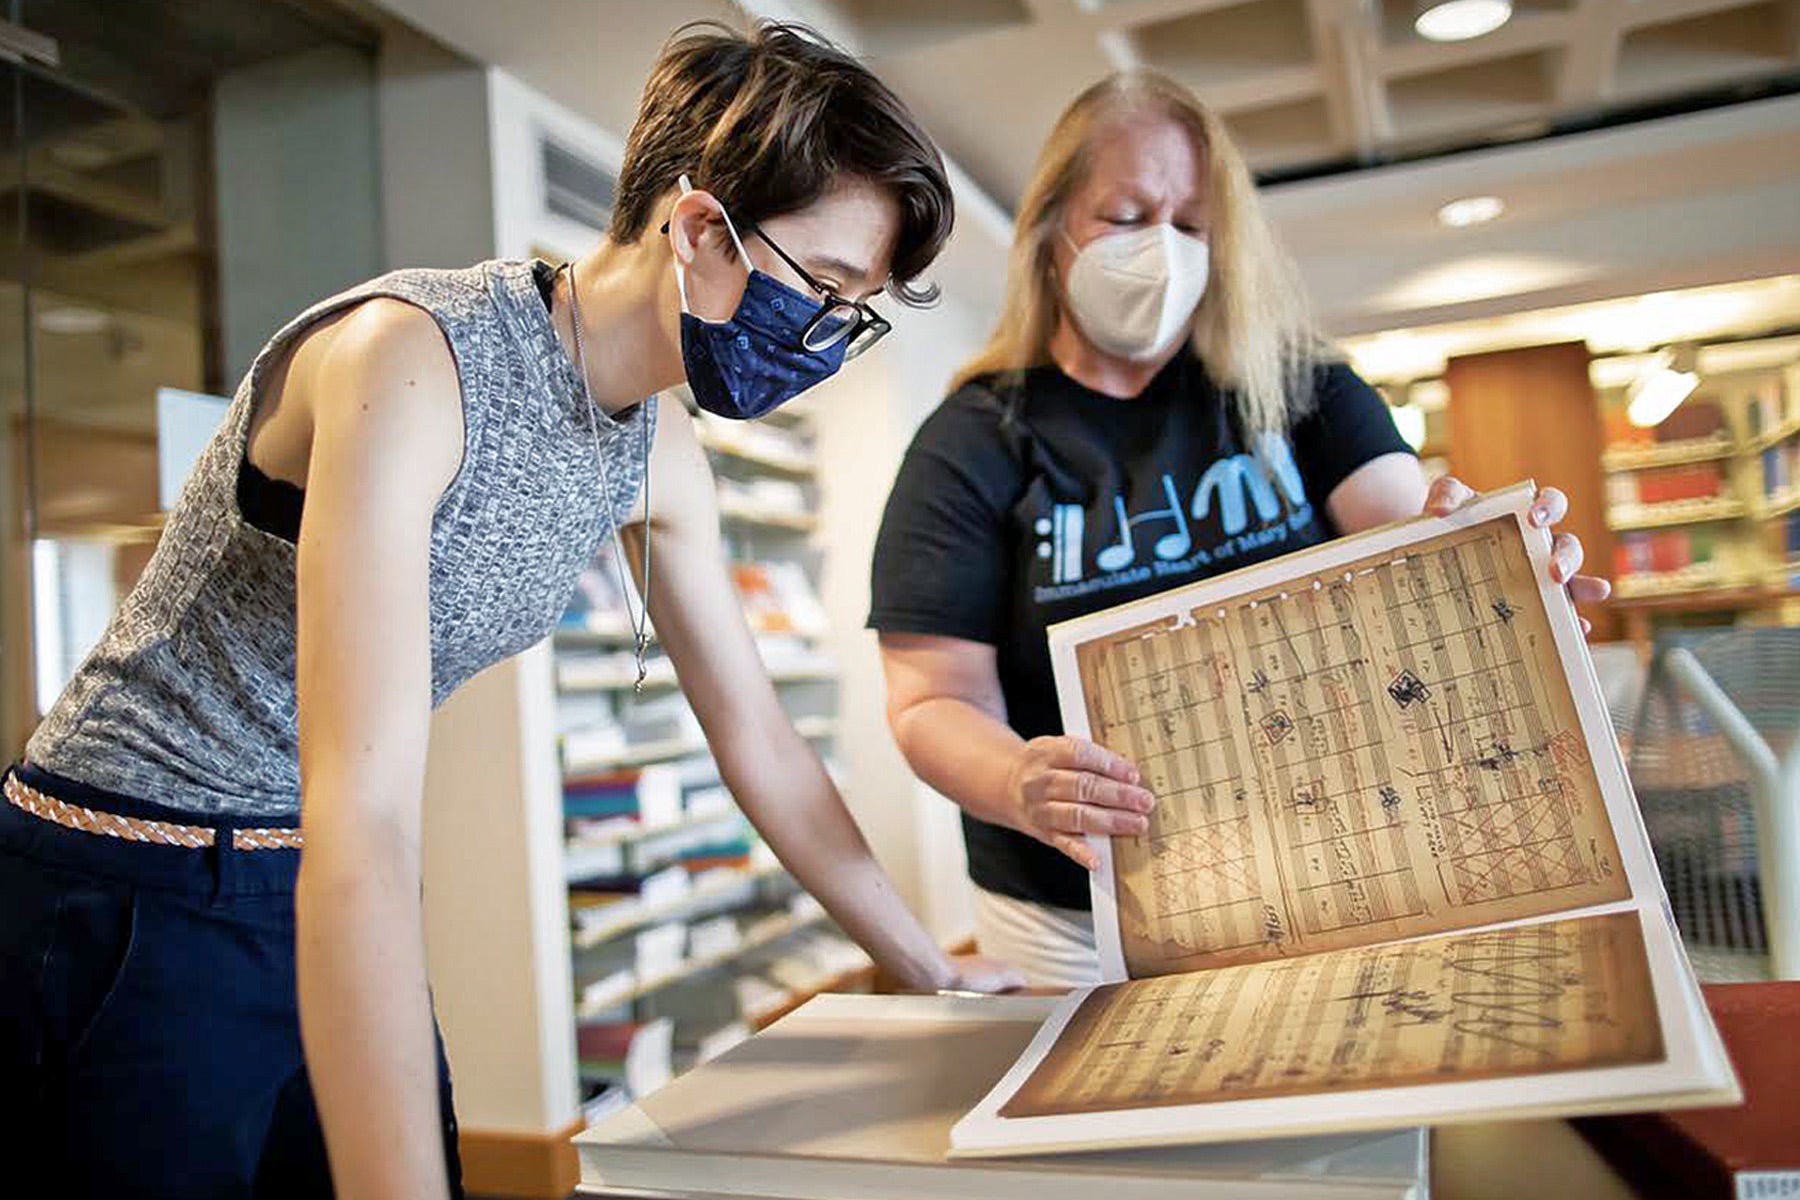 Looking at special collections in music